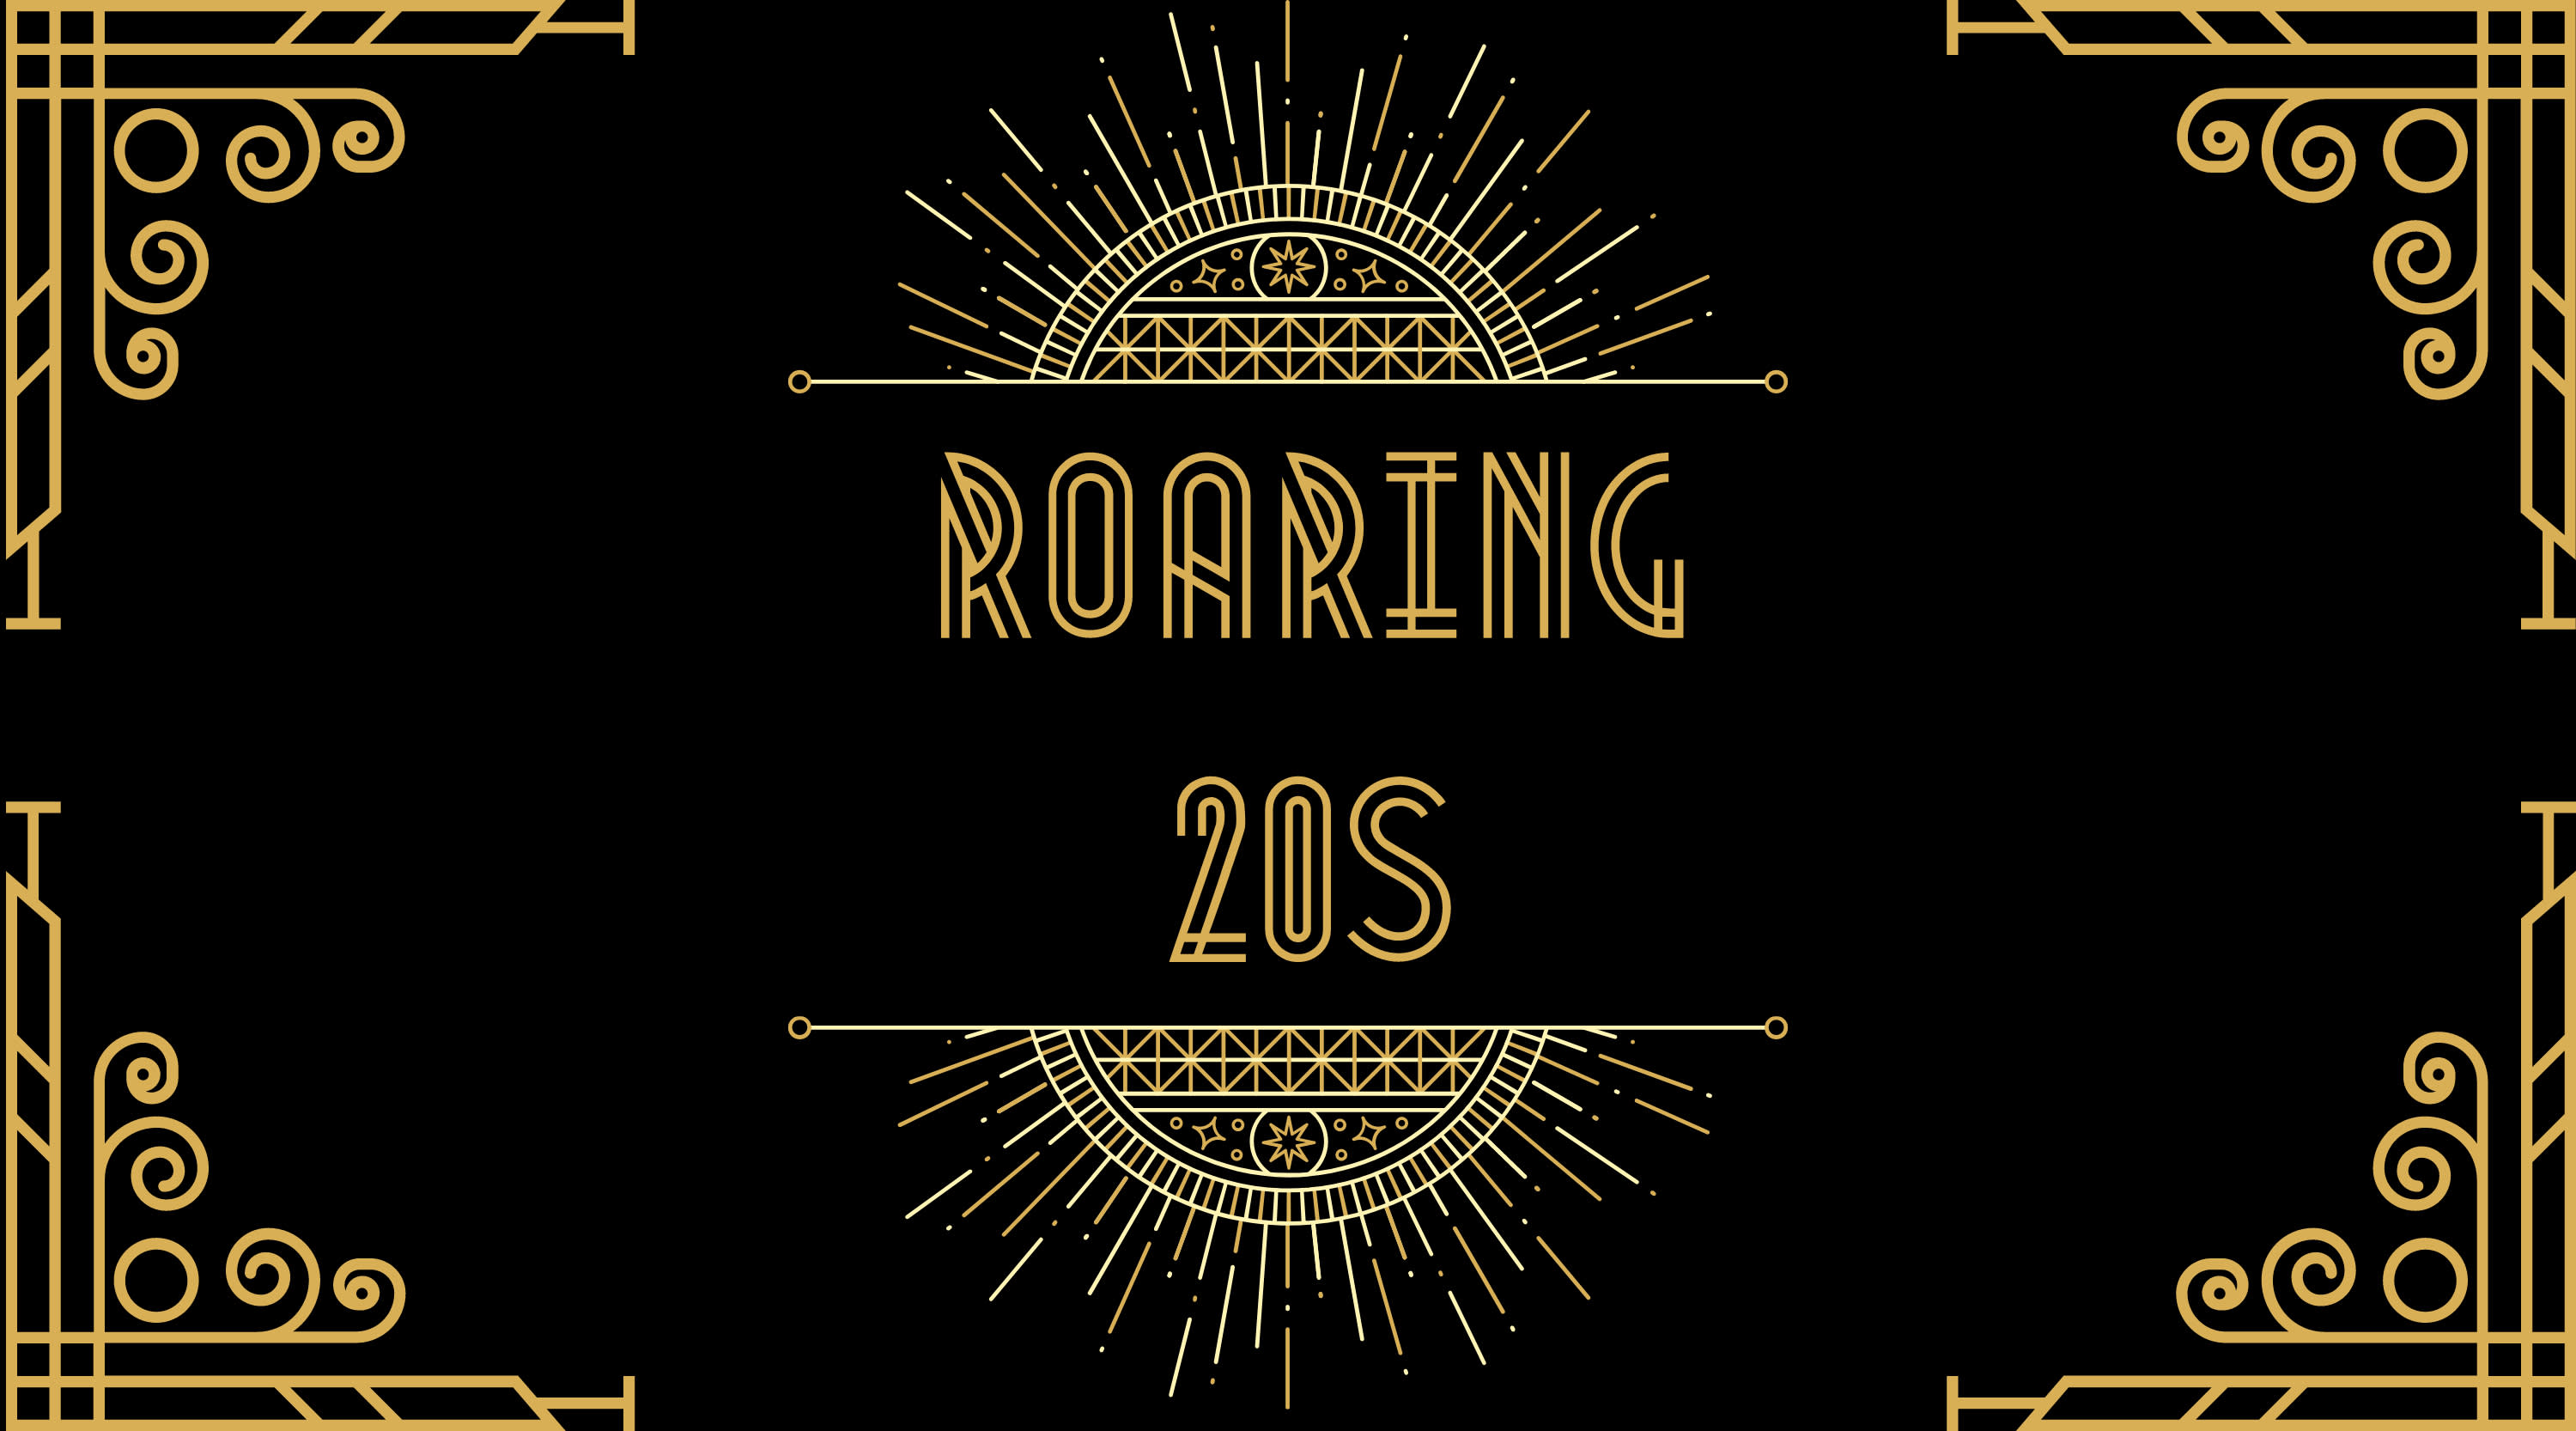 Decade Special: The Roaring 20s